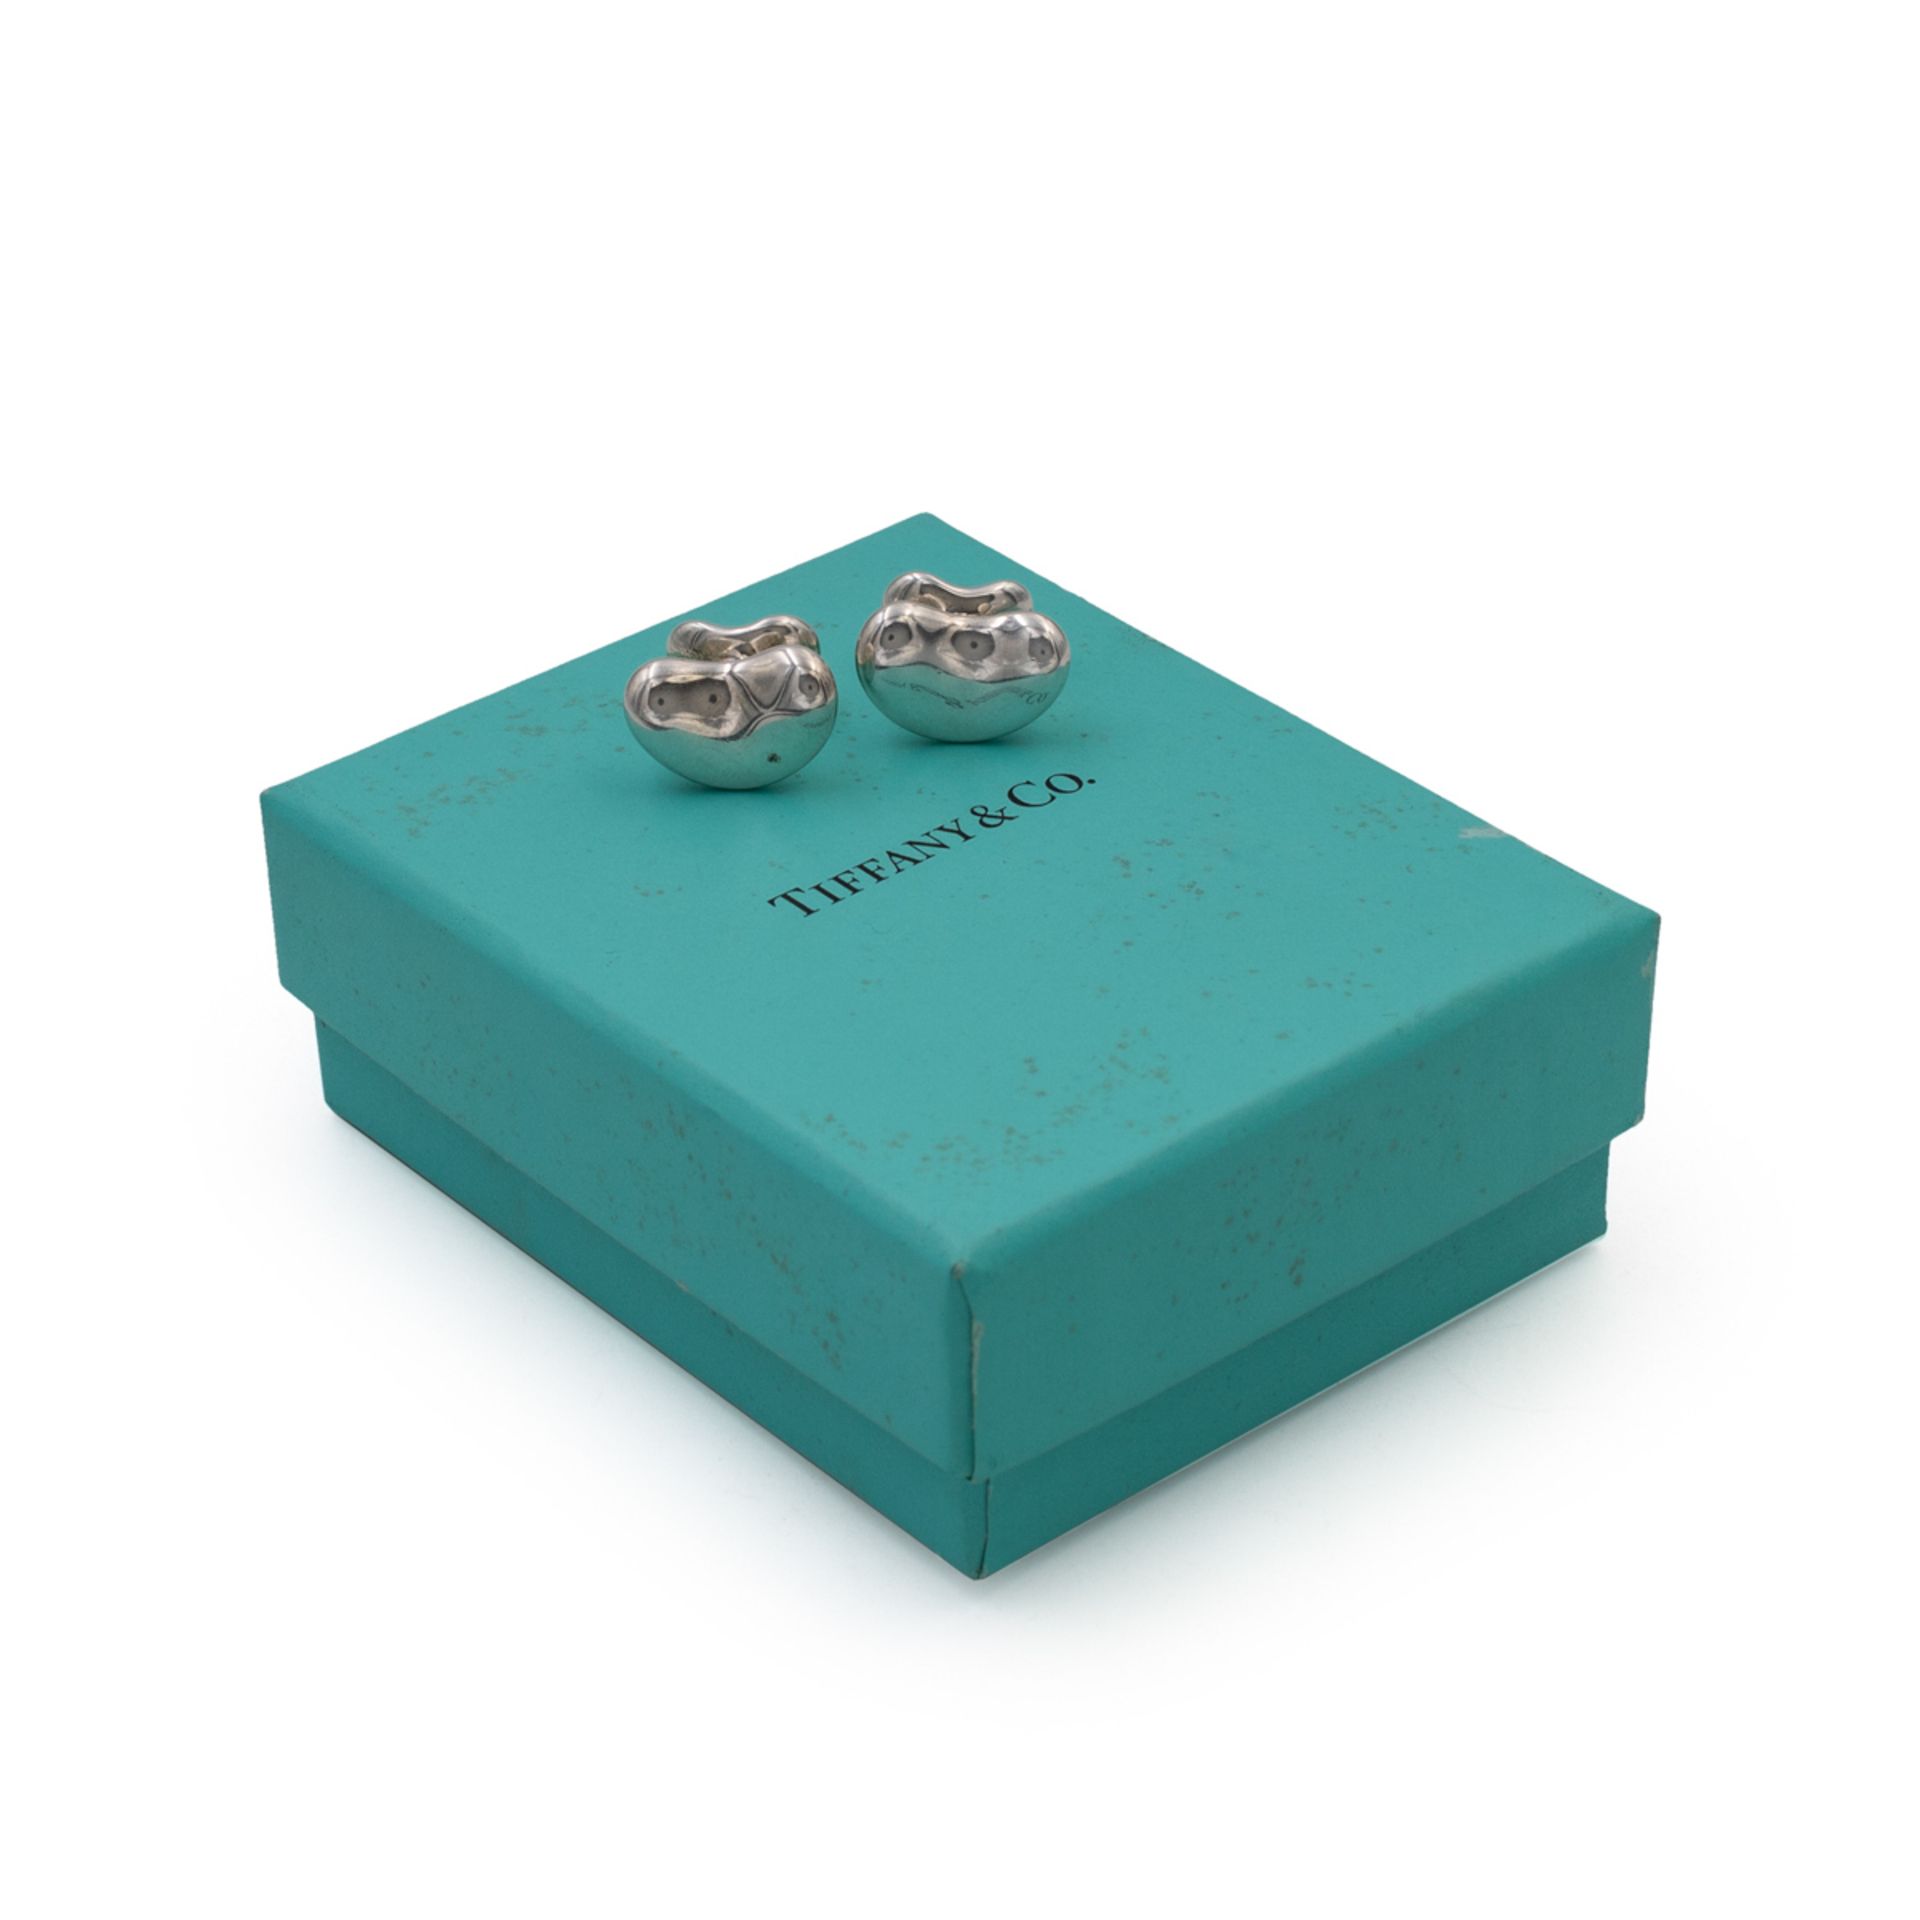 Tiffany & Co. by Elsa Peretti Bean collection cufflinks - Image 3 of 3